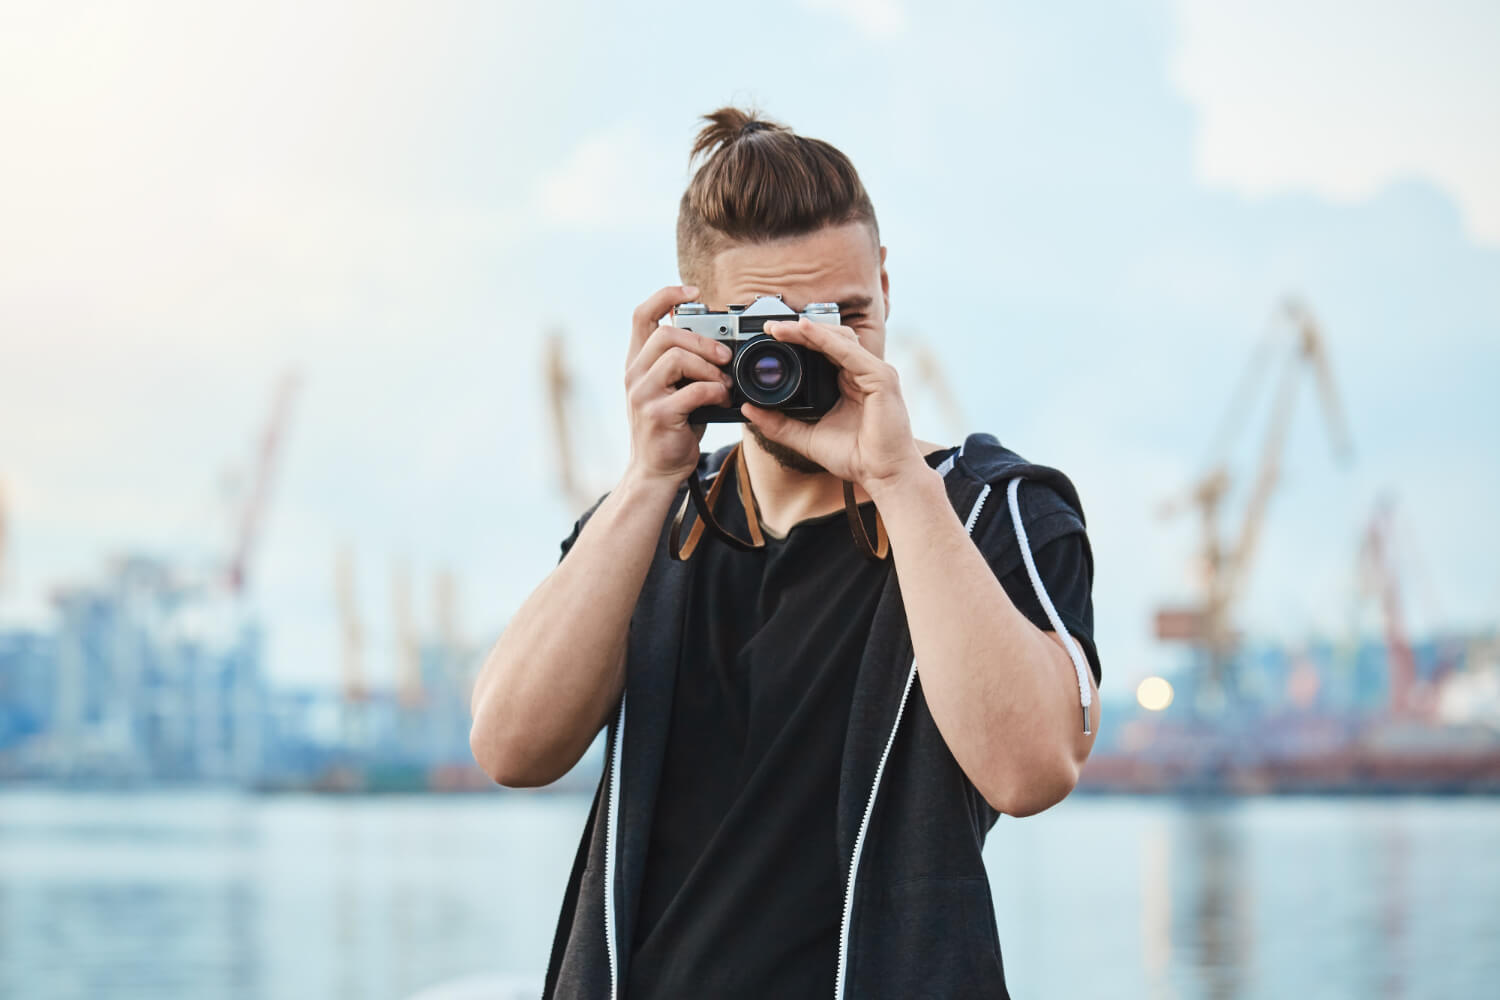 photographer-with-vintage-camera-taking-photos-near-sea-walking-around-city-picture-every-interesting-moment-1.jpg